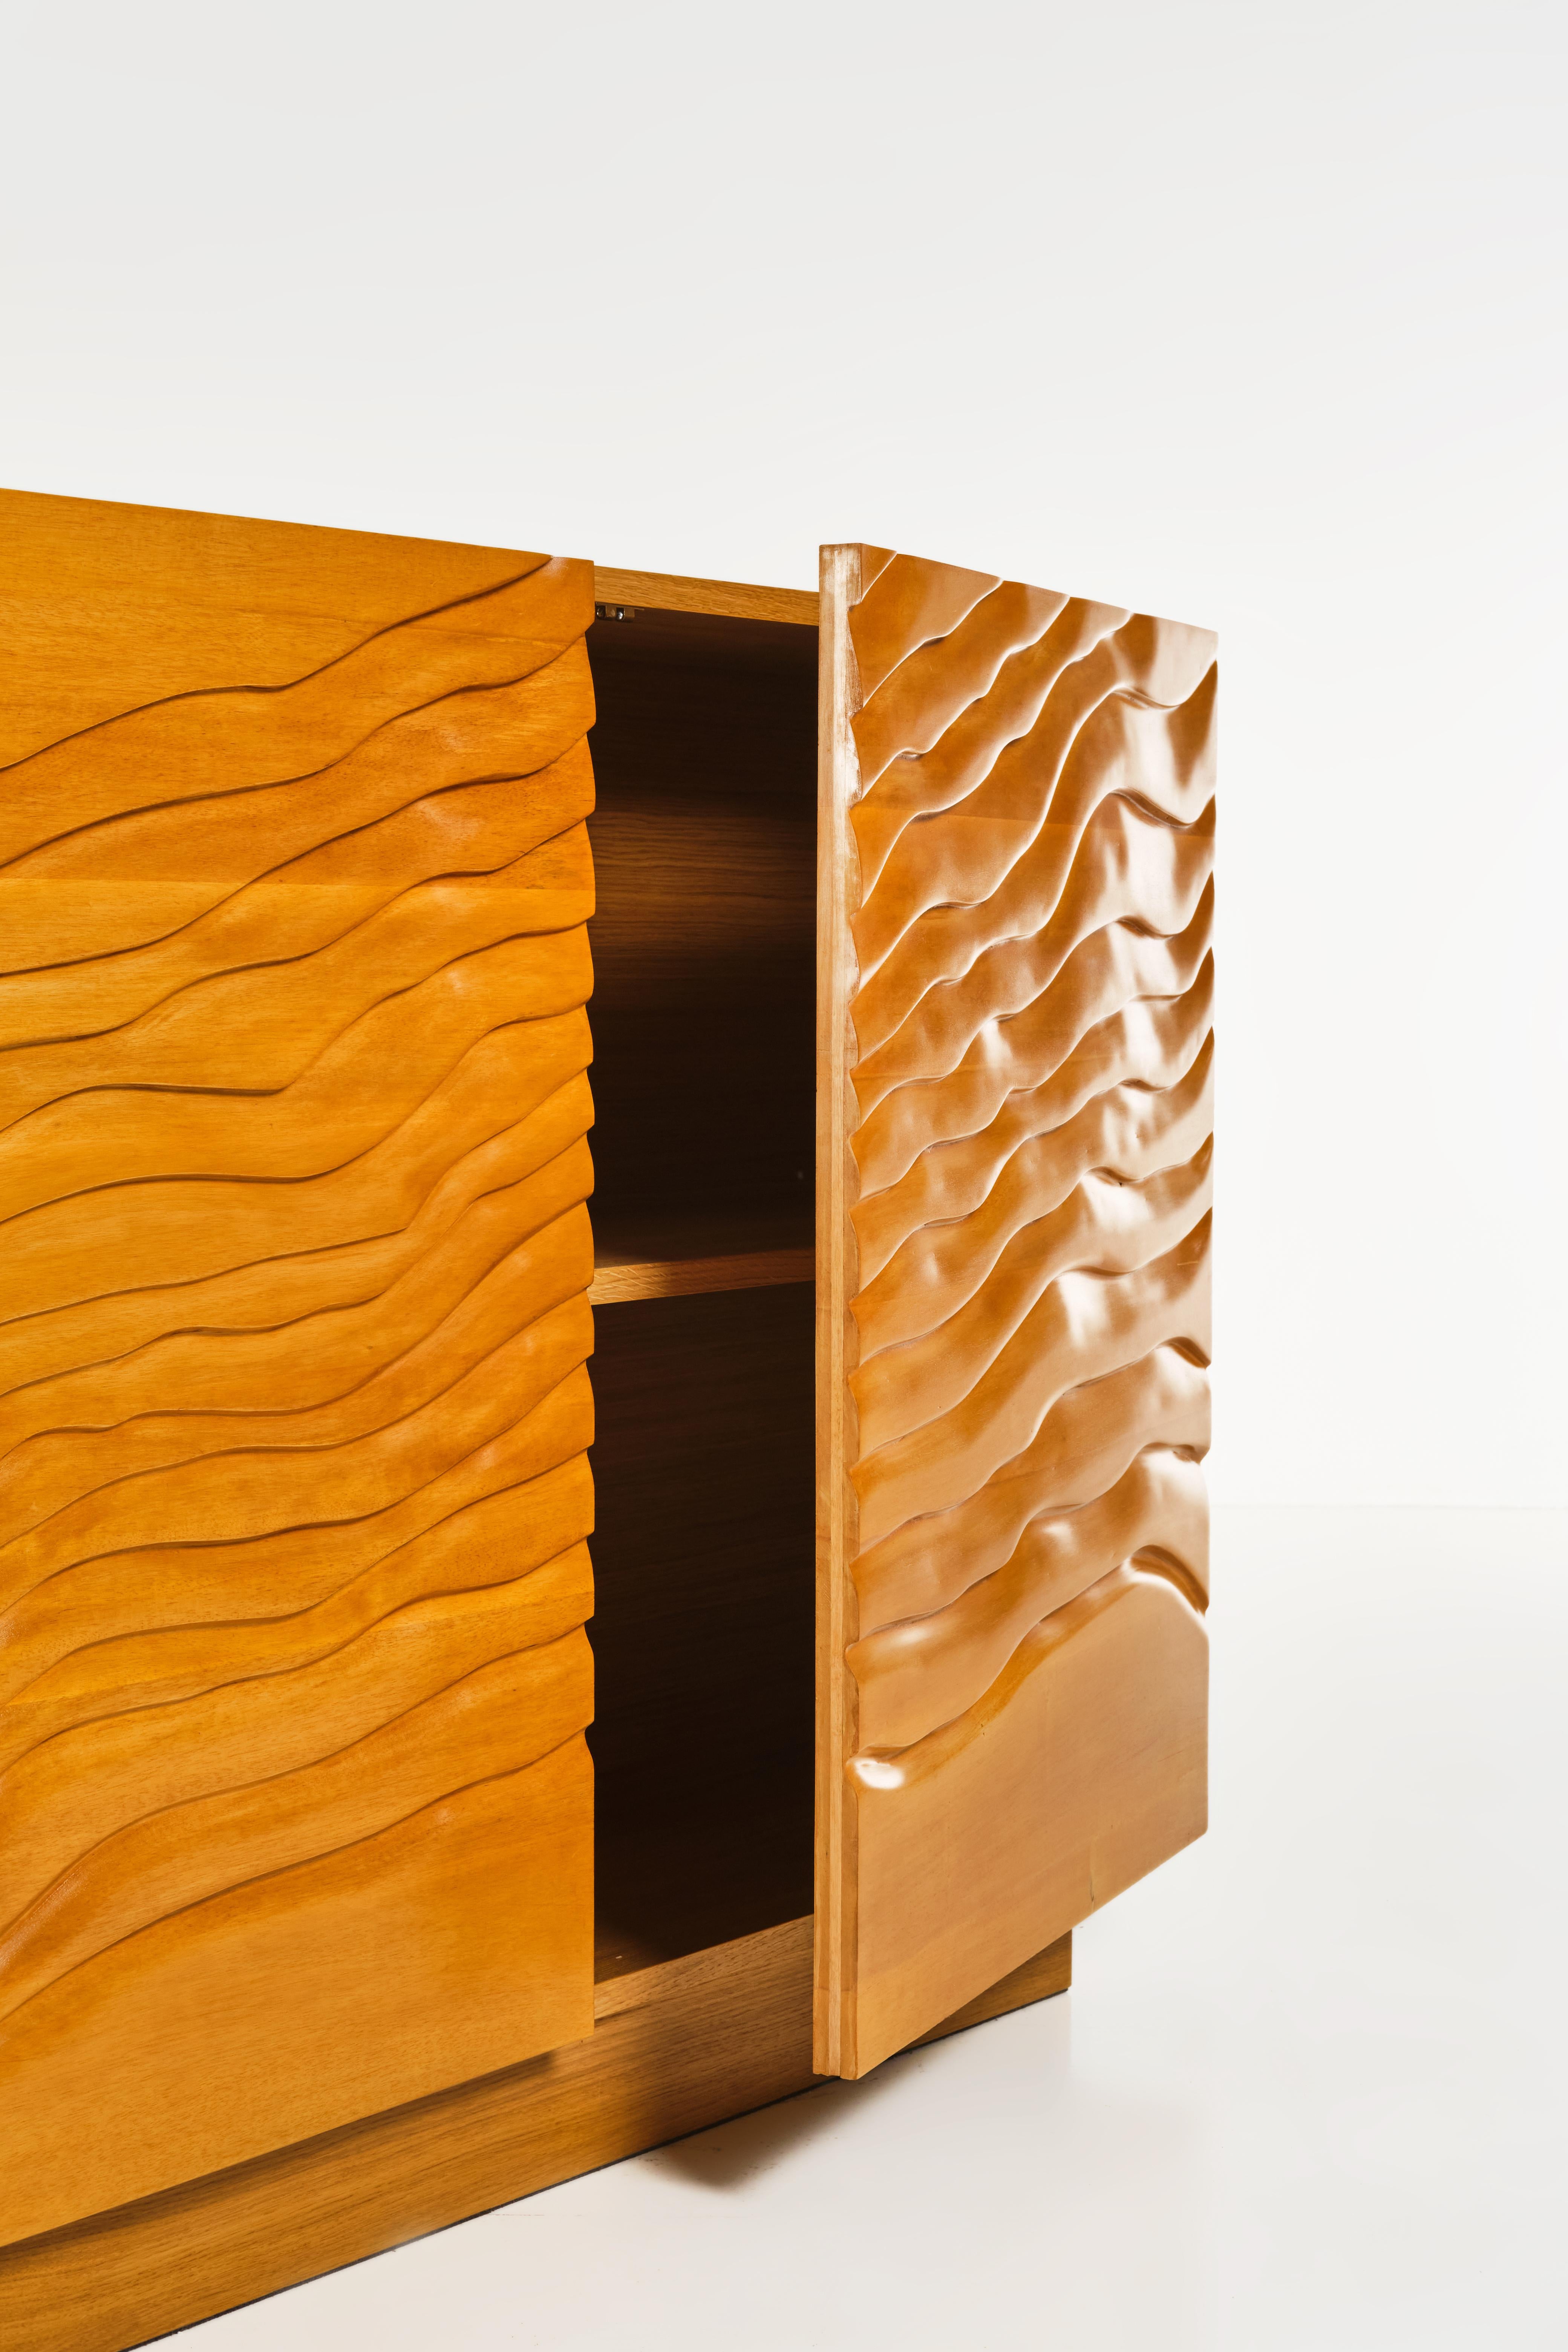 Pair of Sculptural Cabinets, Italian Design, 1960 circa For Sale 5